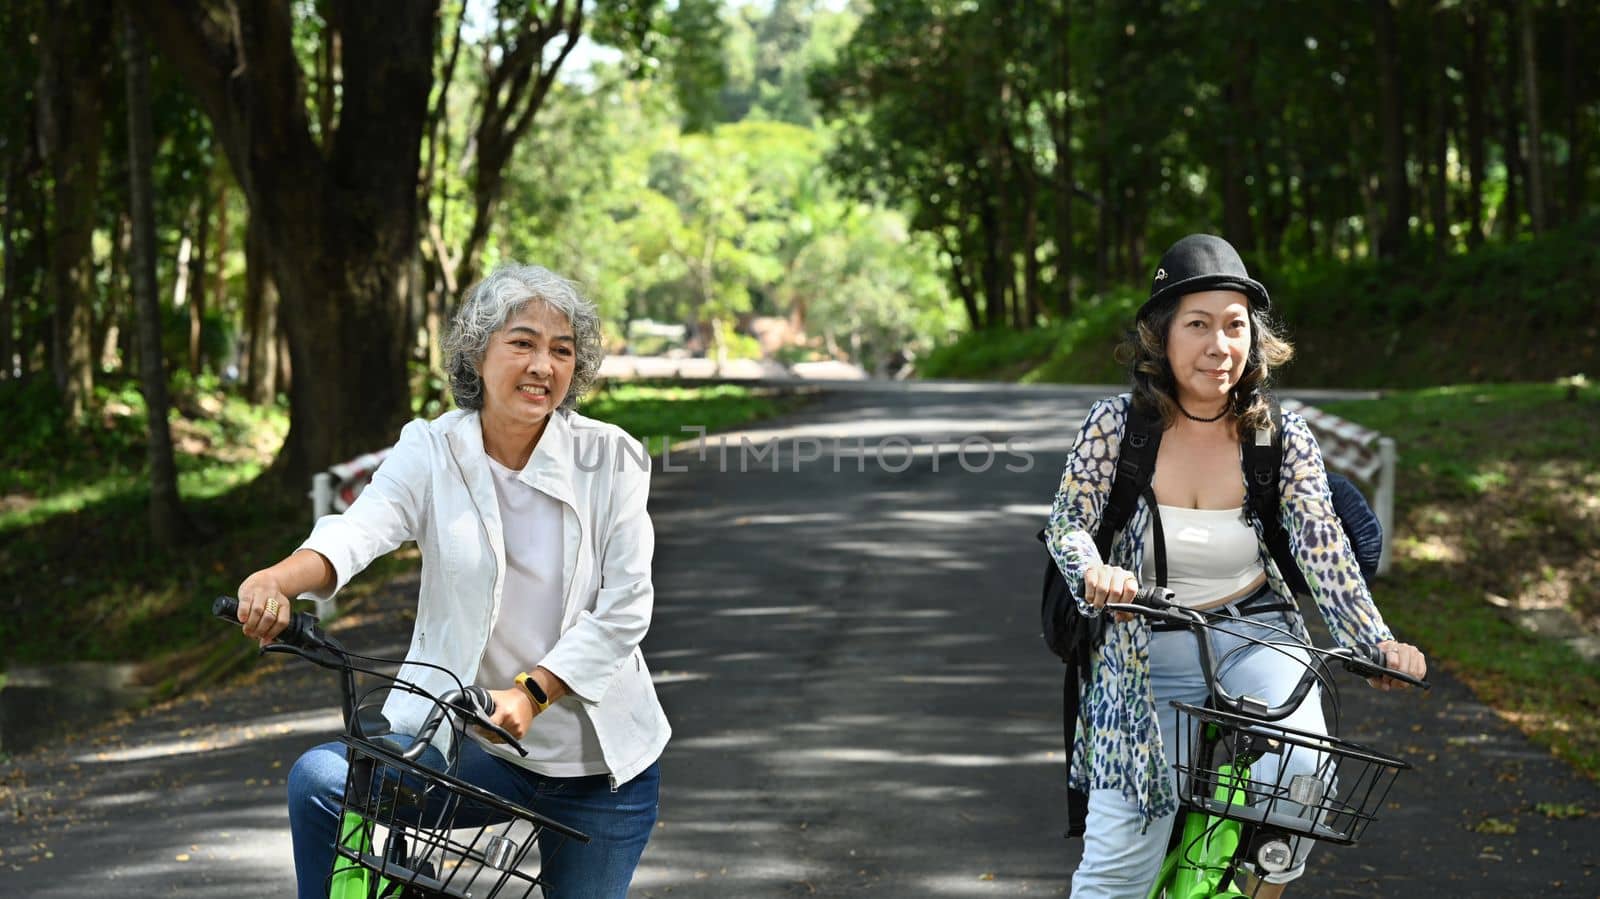 Two smiling middle aged women cycling in nature park on beautiful day. Retirement people lifestyle, outdoor activity concept.